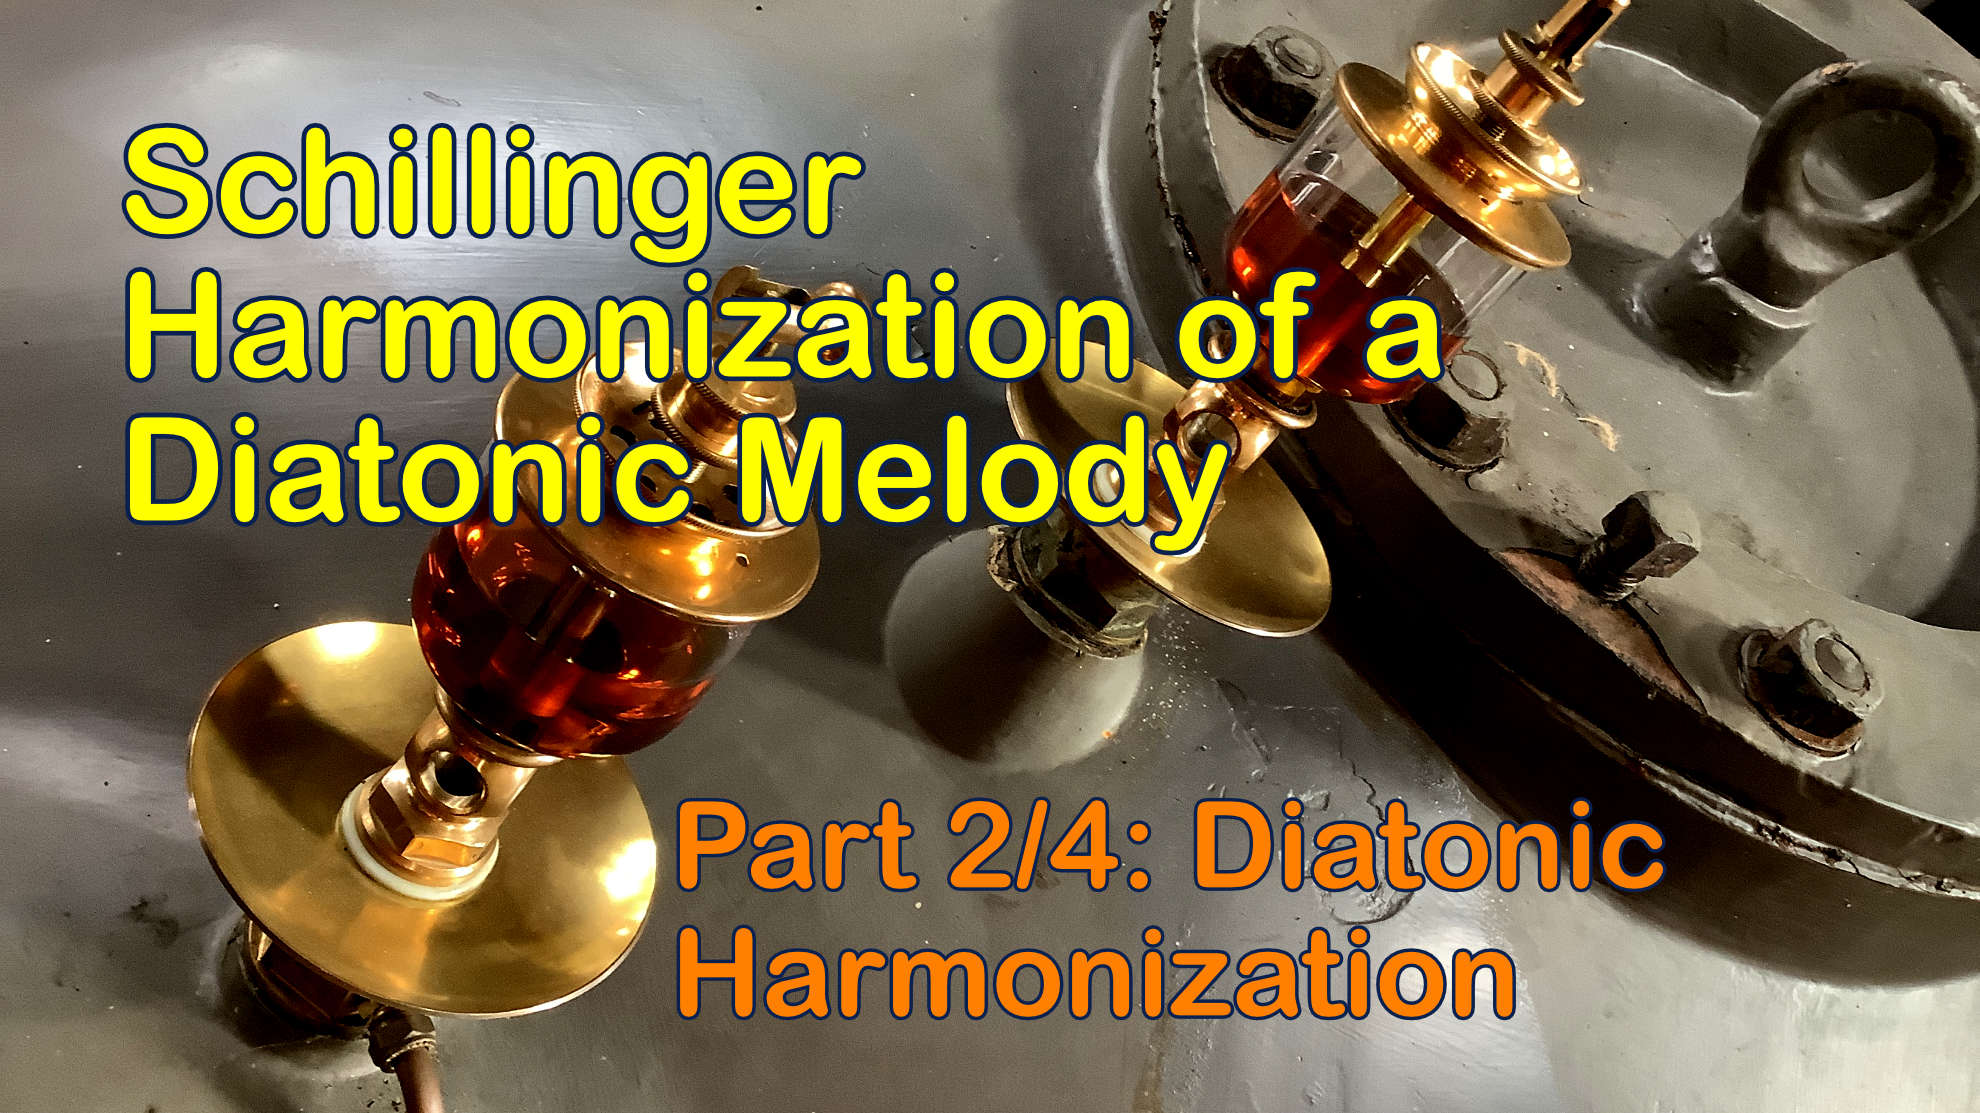 YouTube thumbnail for the Schillinger Harmonization of a Diatonic Melody Part 2 video tutorial